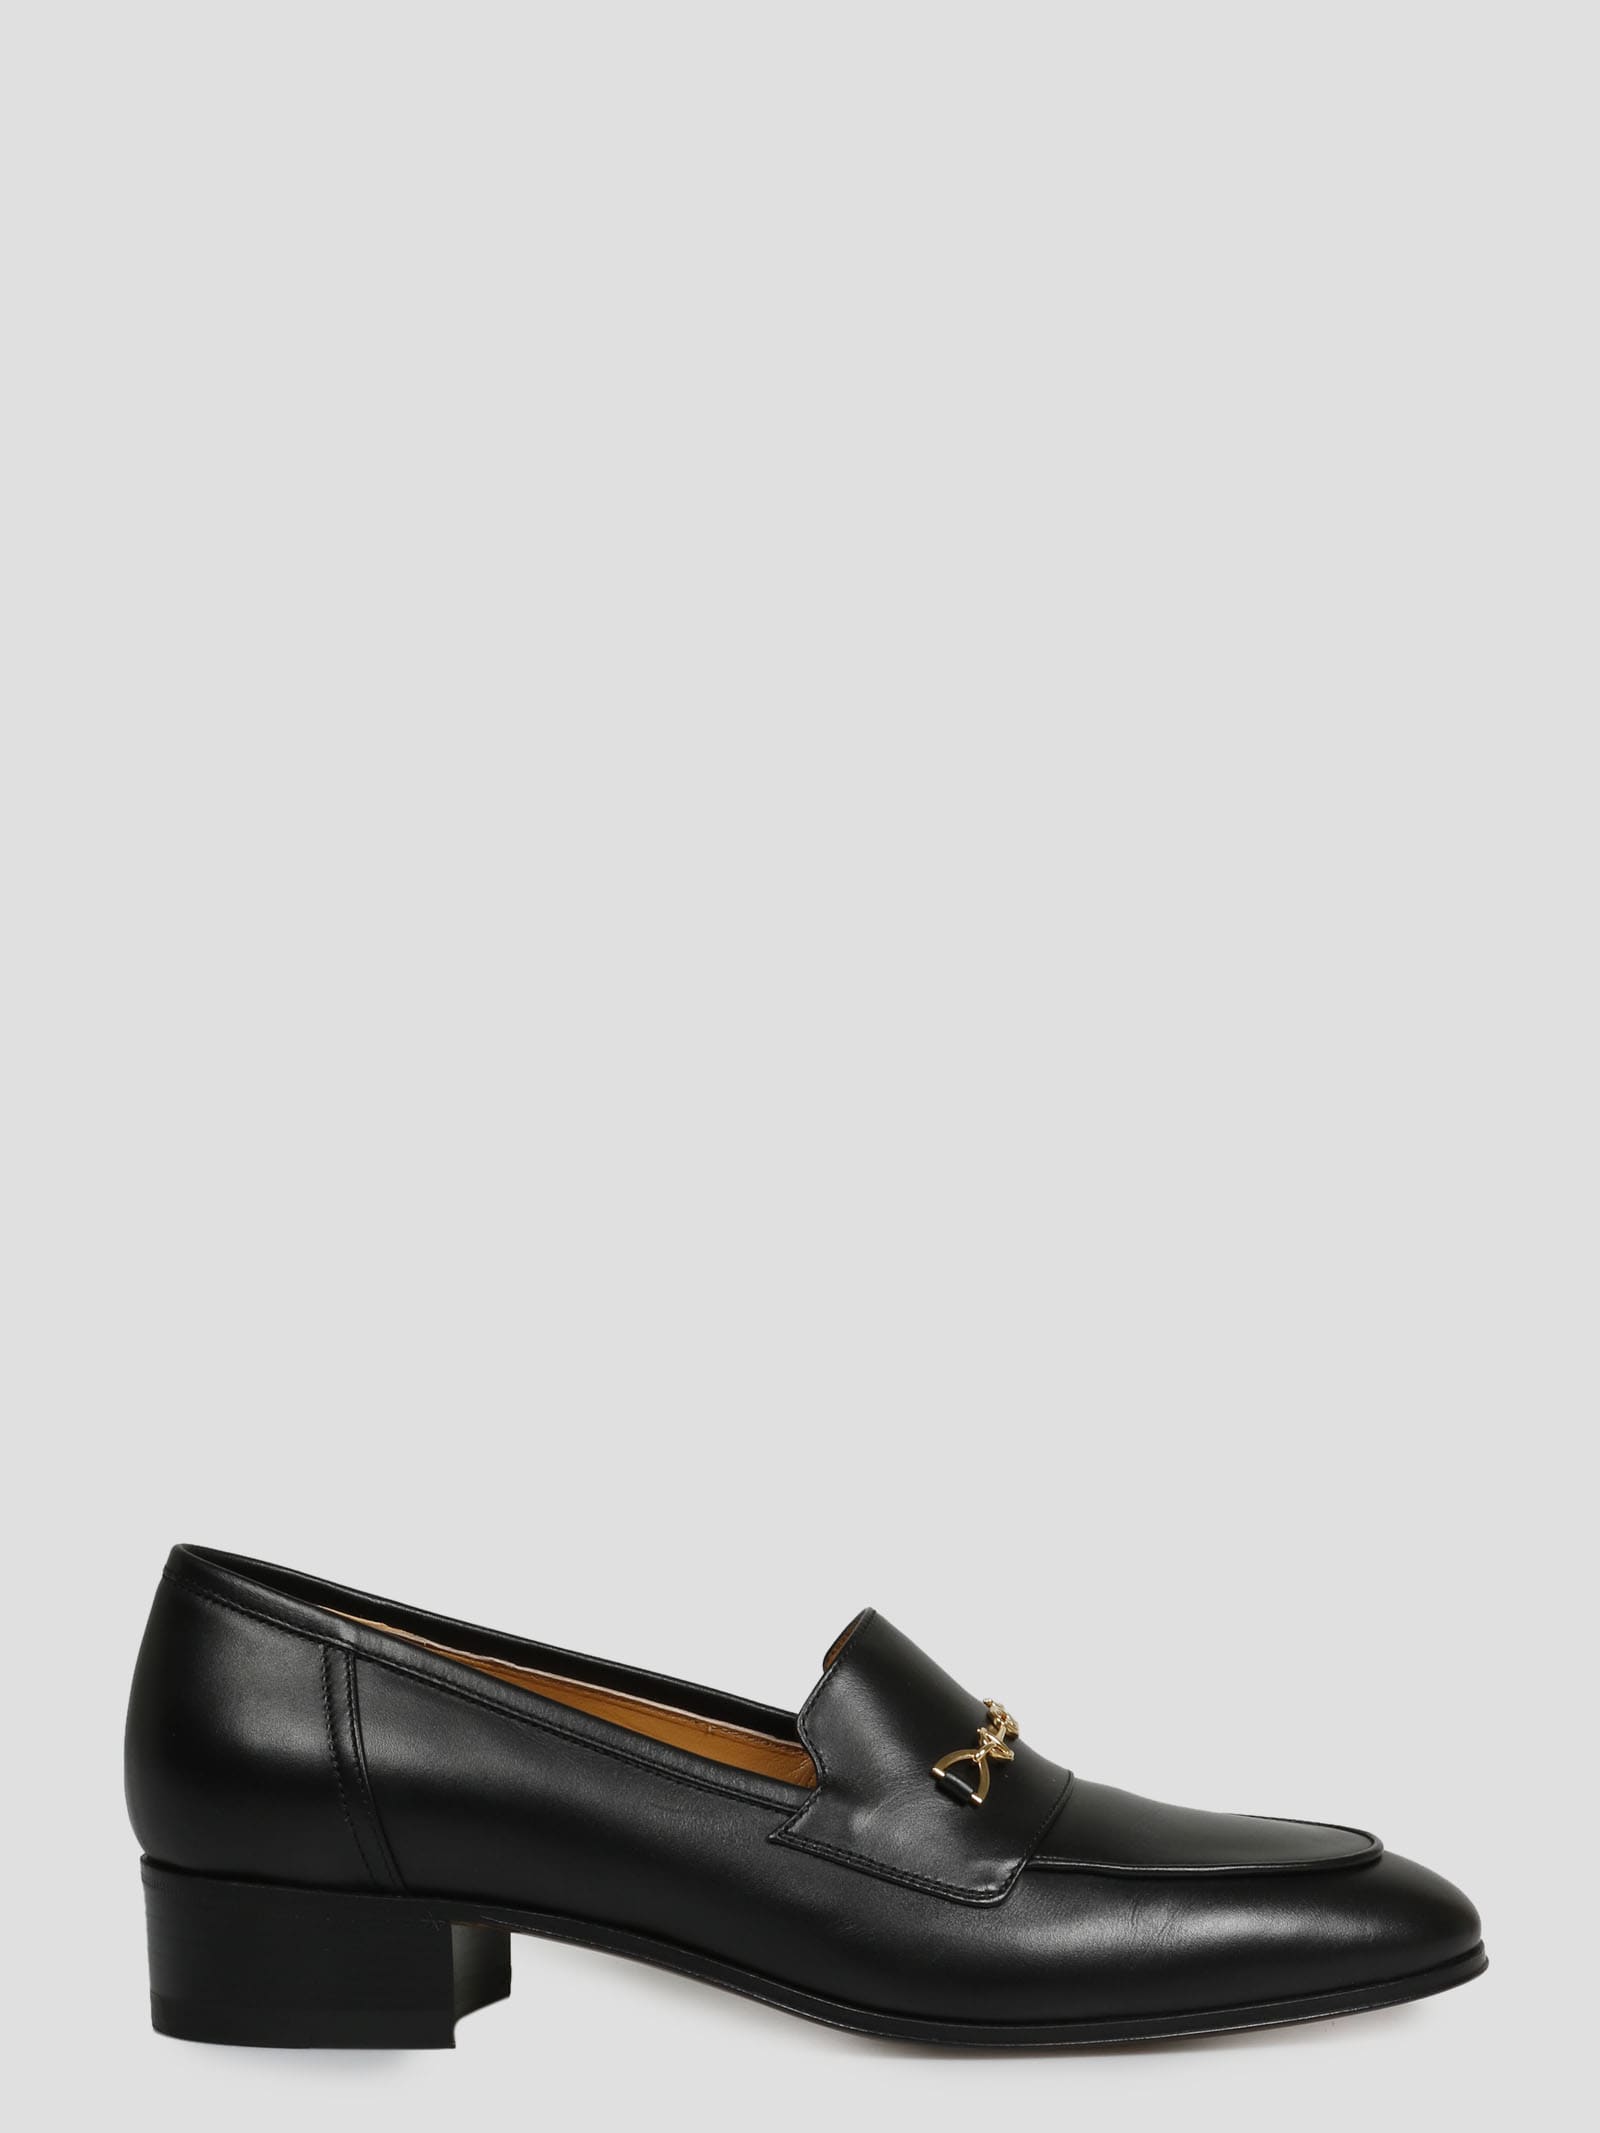 GUCCI GG CLAMP LOAFER